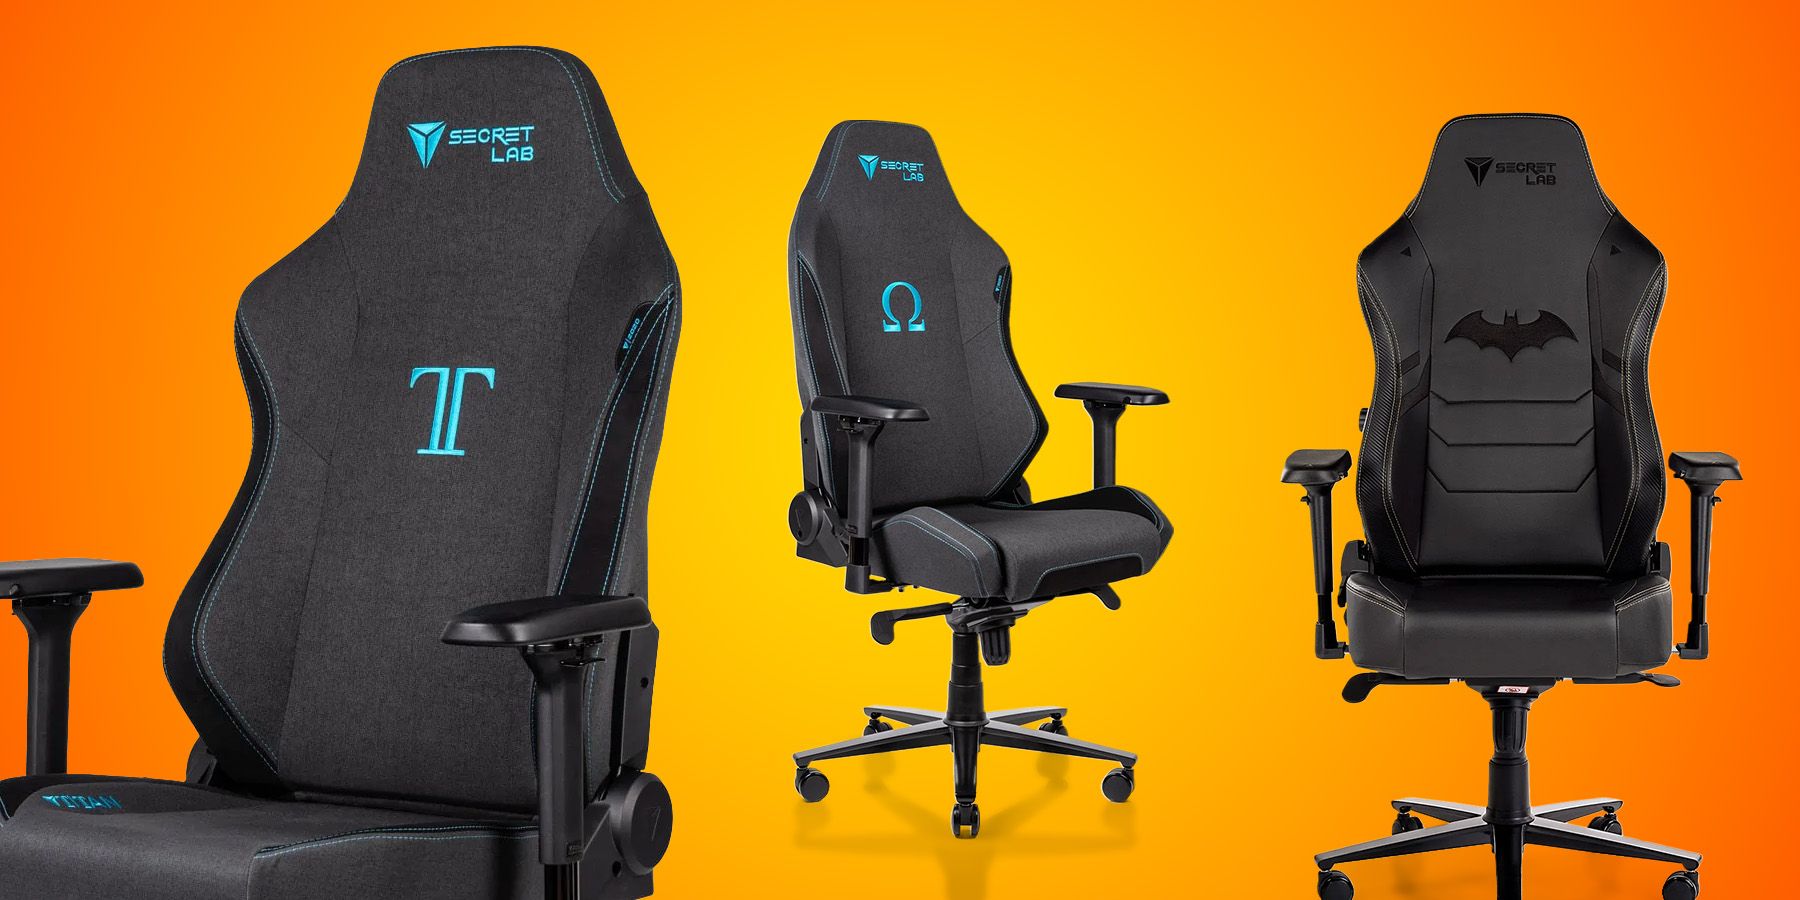 which-secretlab-gaming-chair-material-is-best-gamerant-content-1